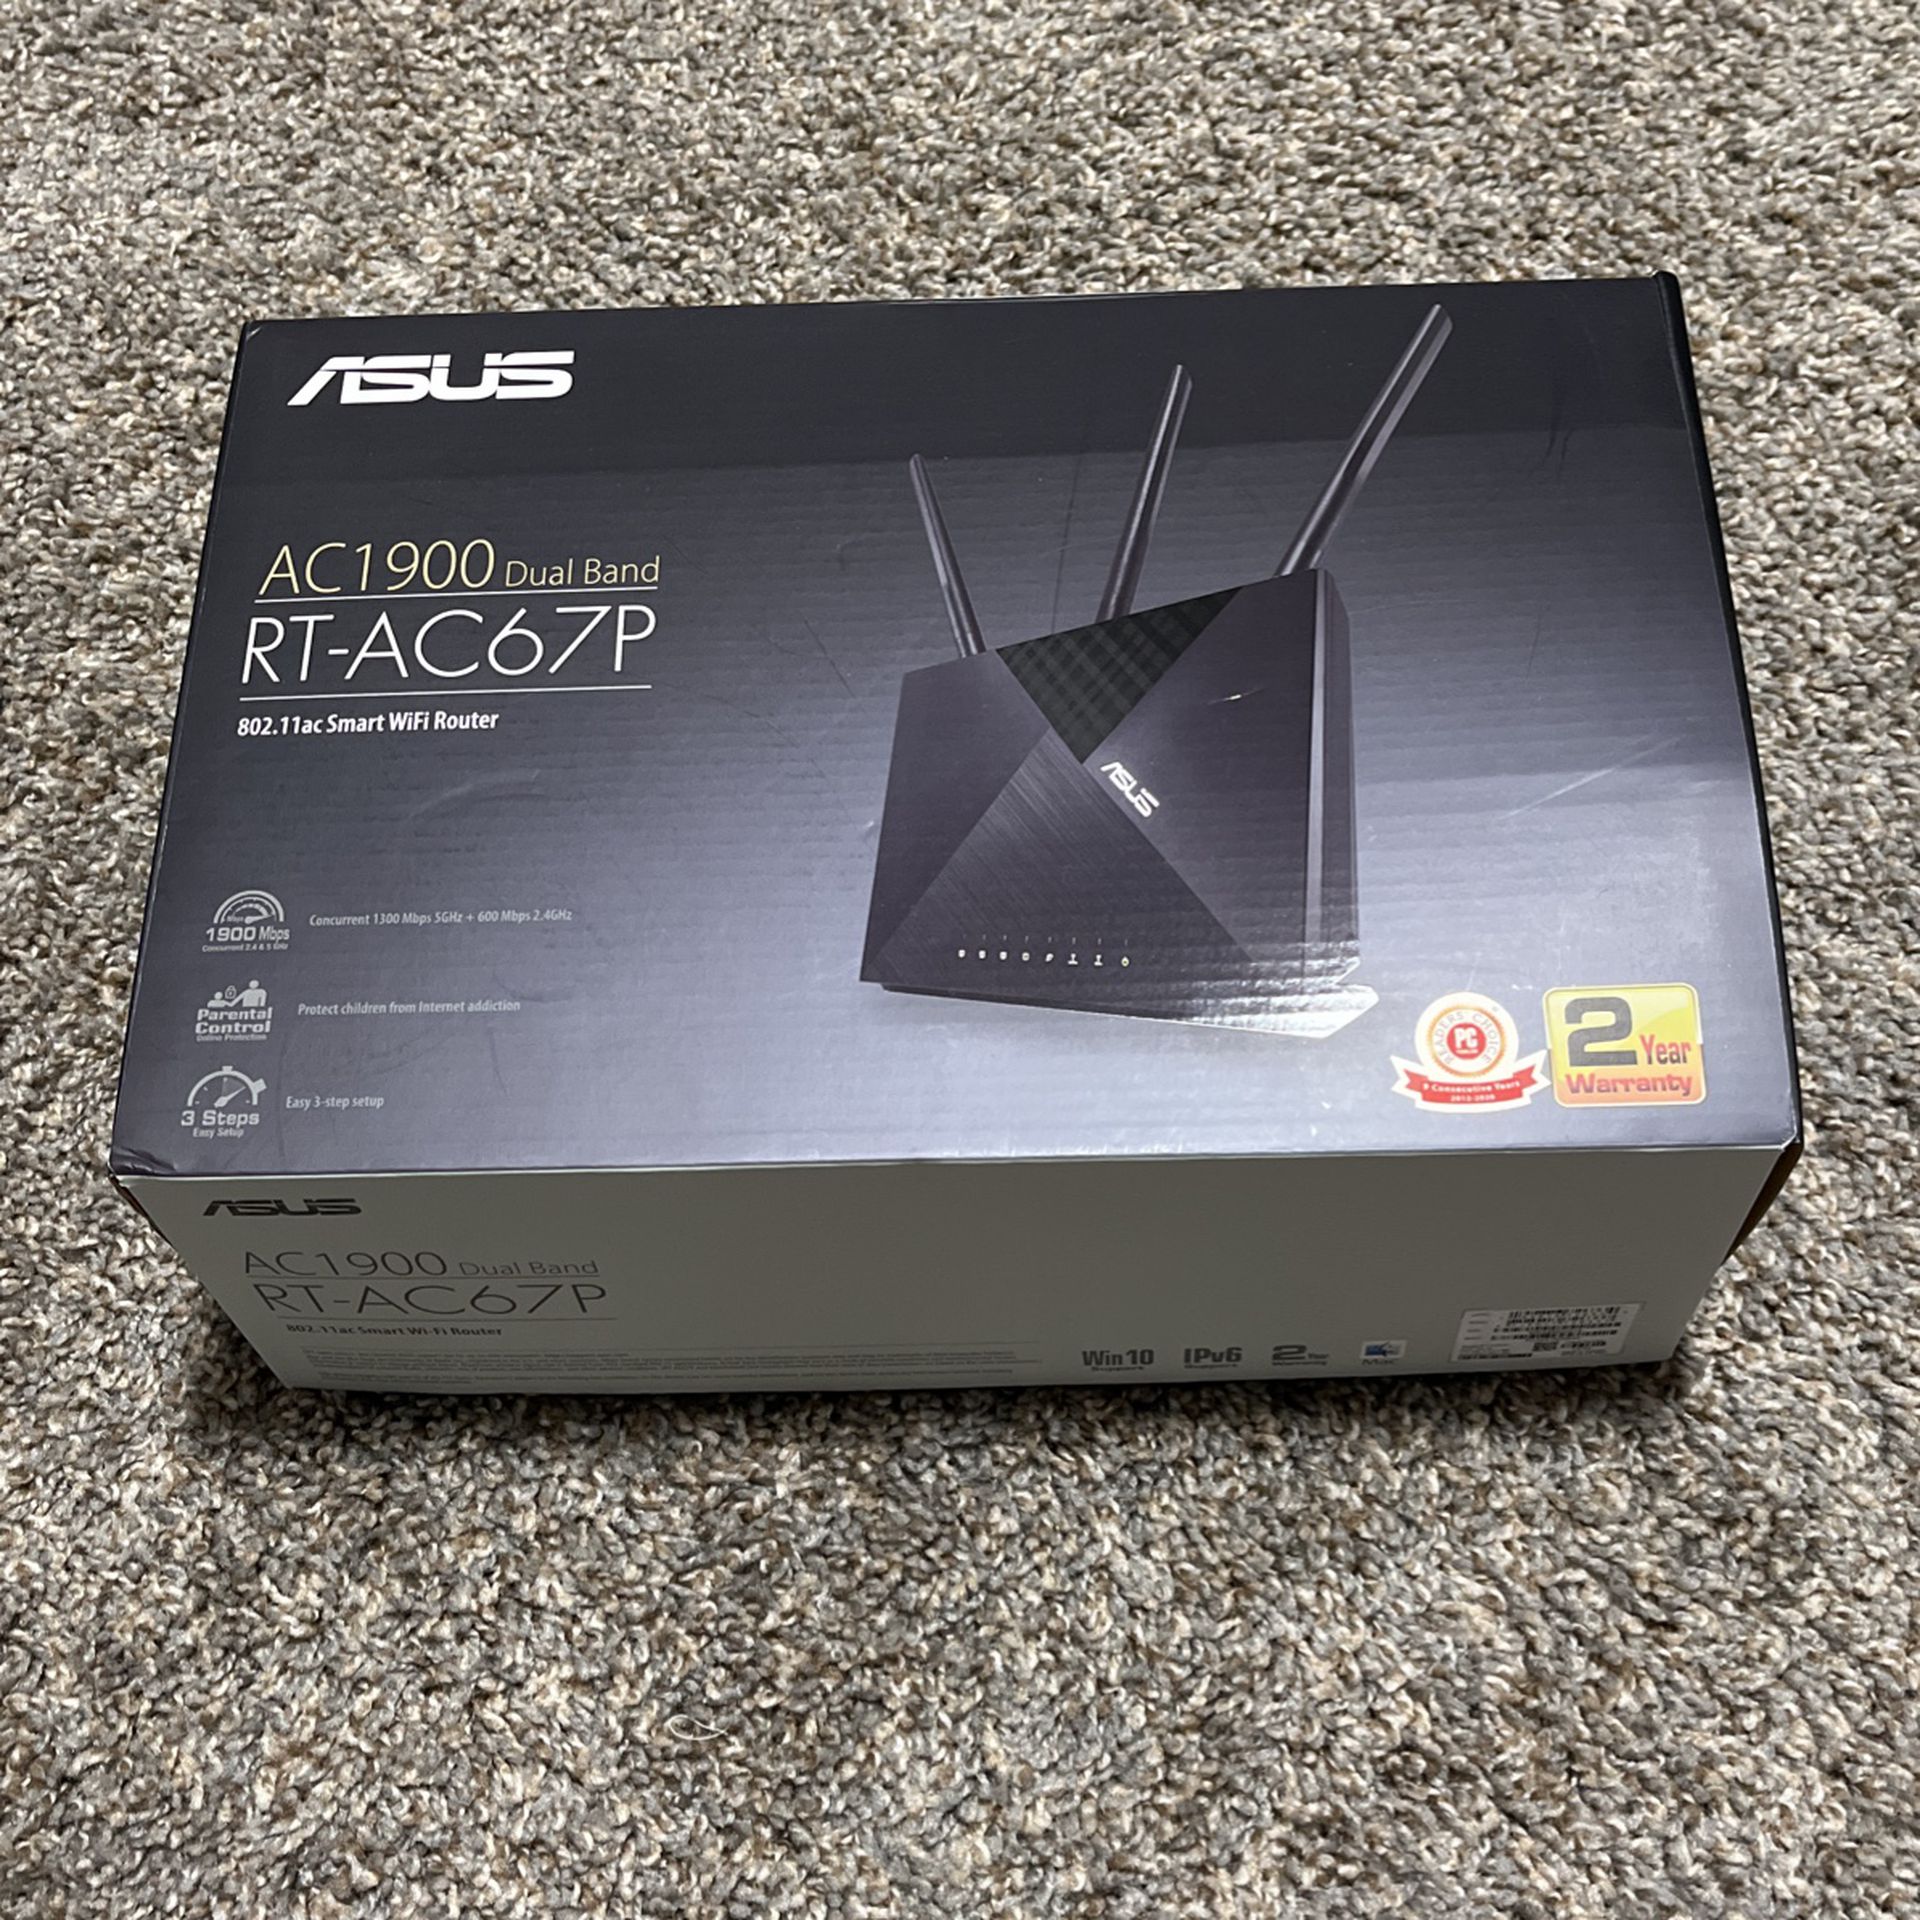 AC1900 Dual Band ASUS Router